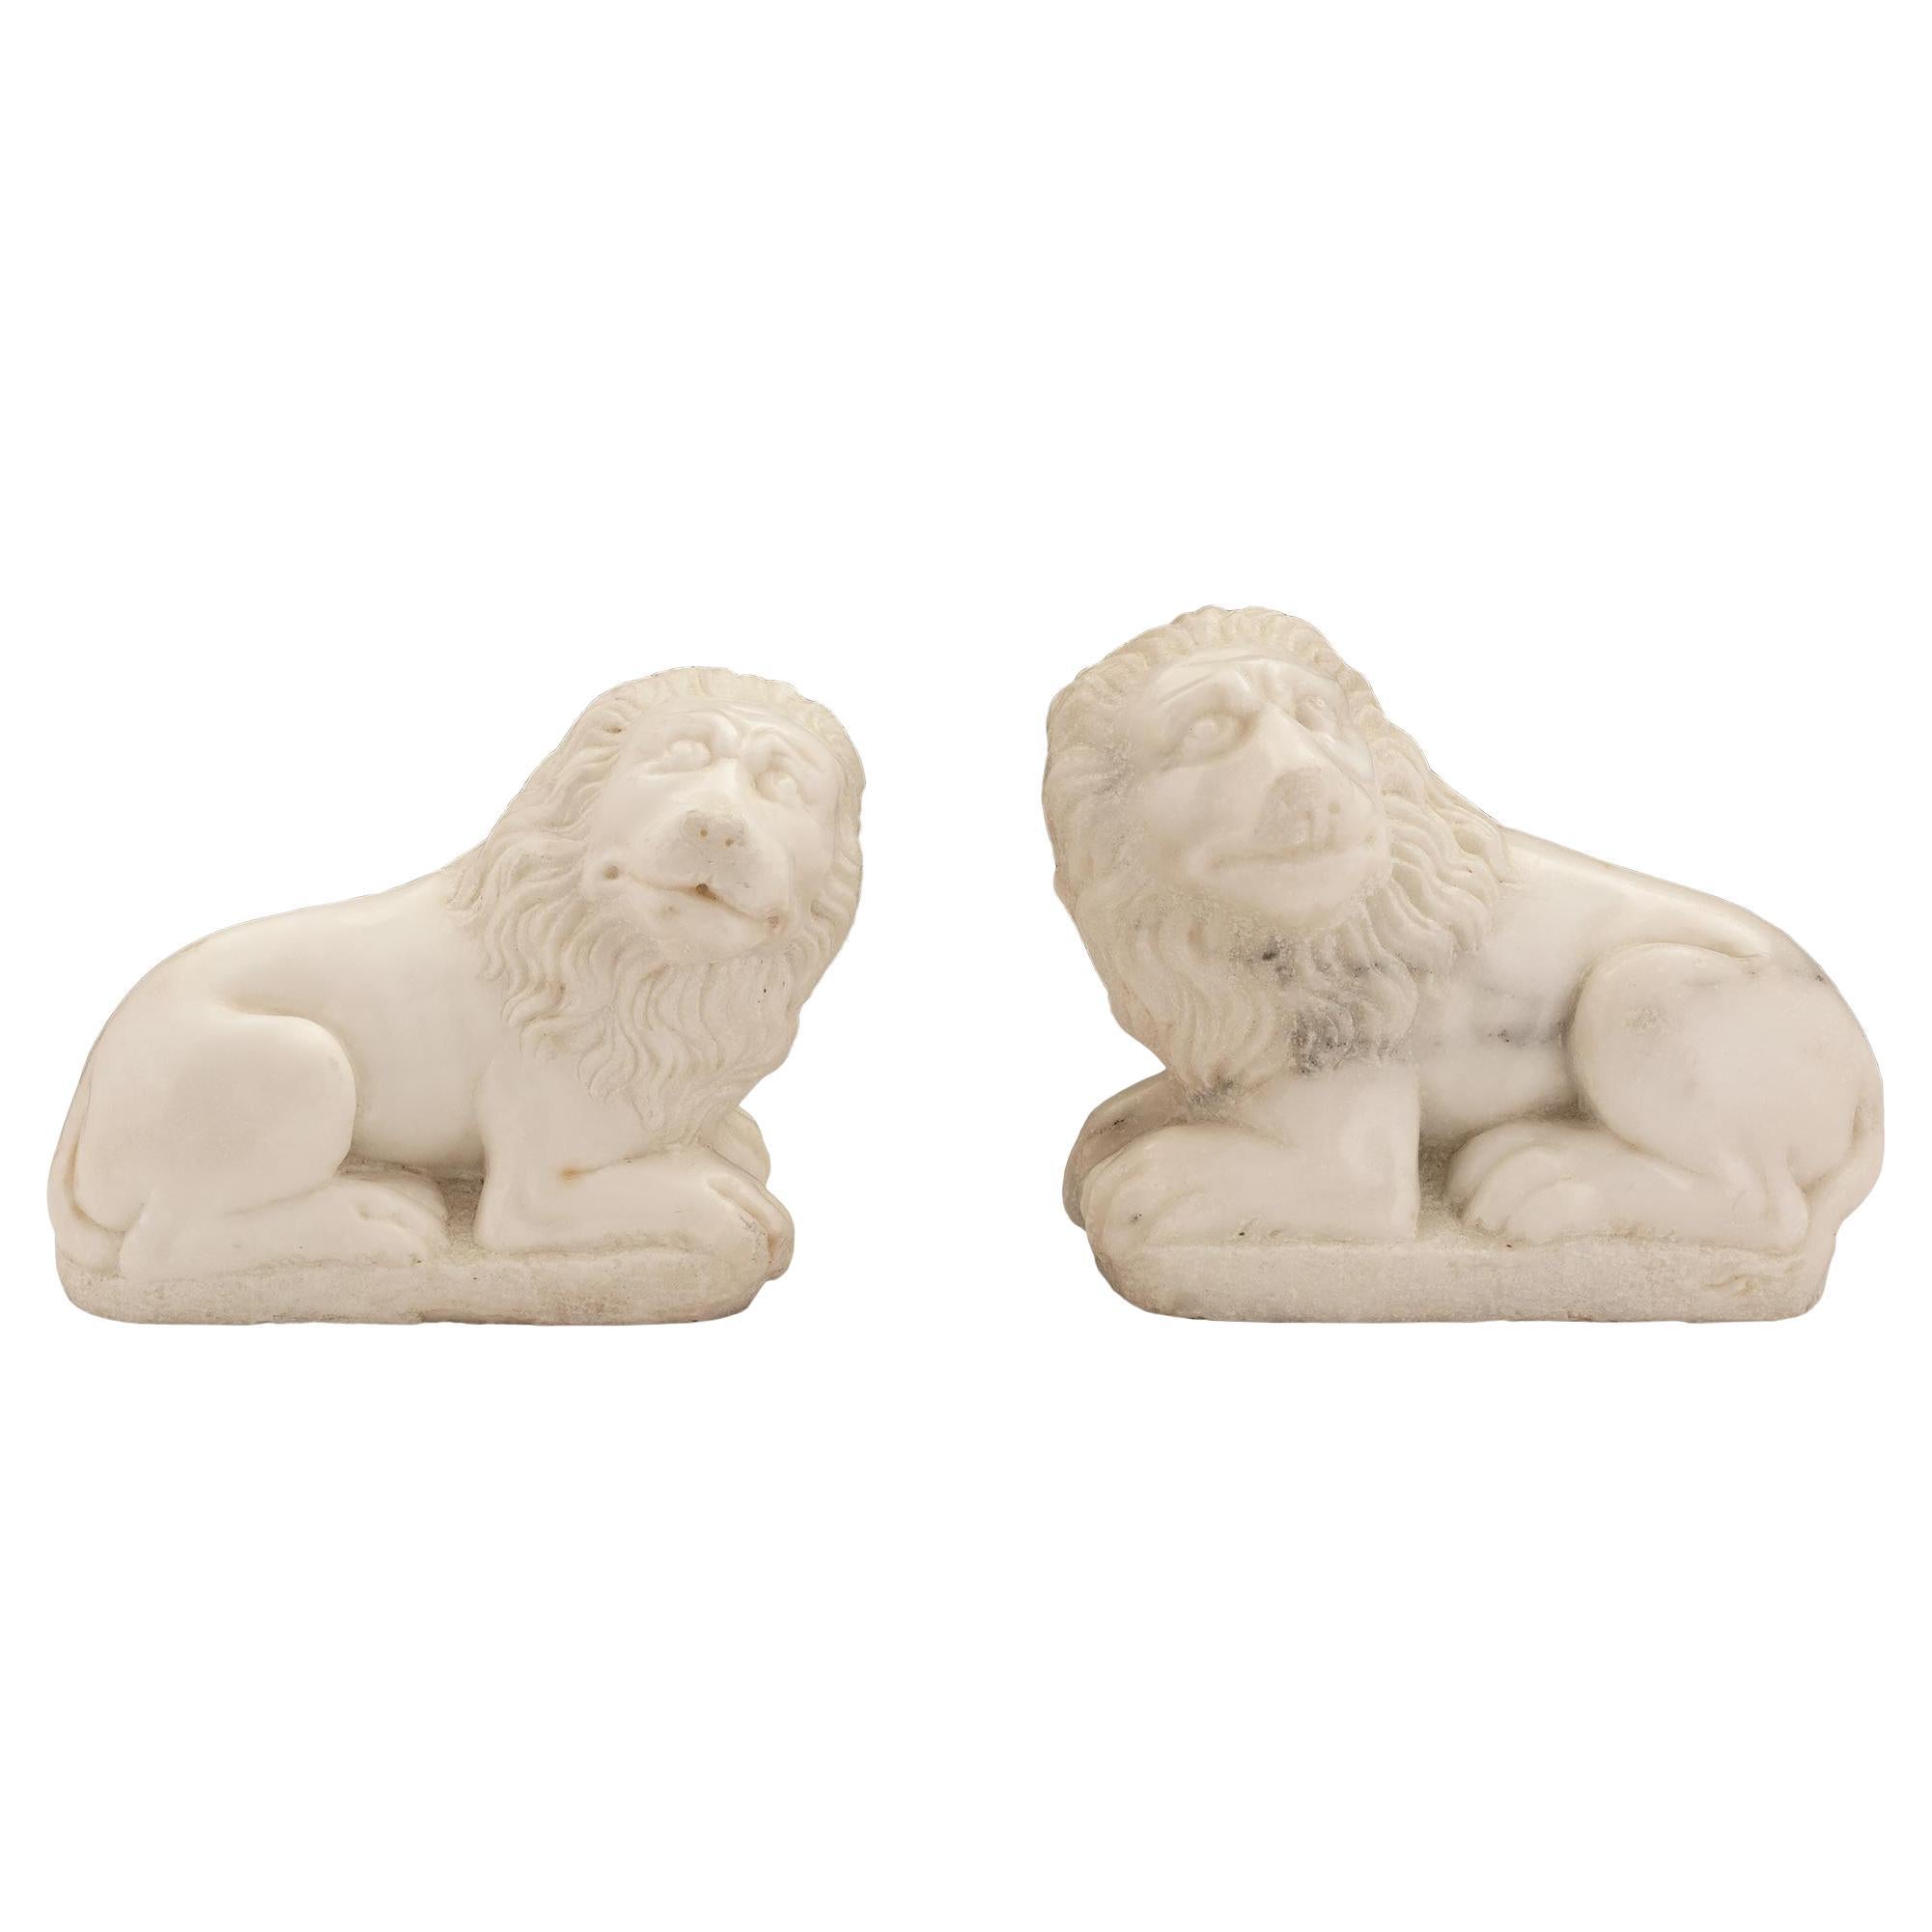 Pair of Italian 18th Century White Carrara Marble Statuettes of Lions For Sale